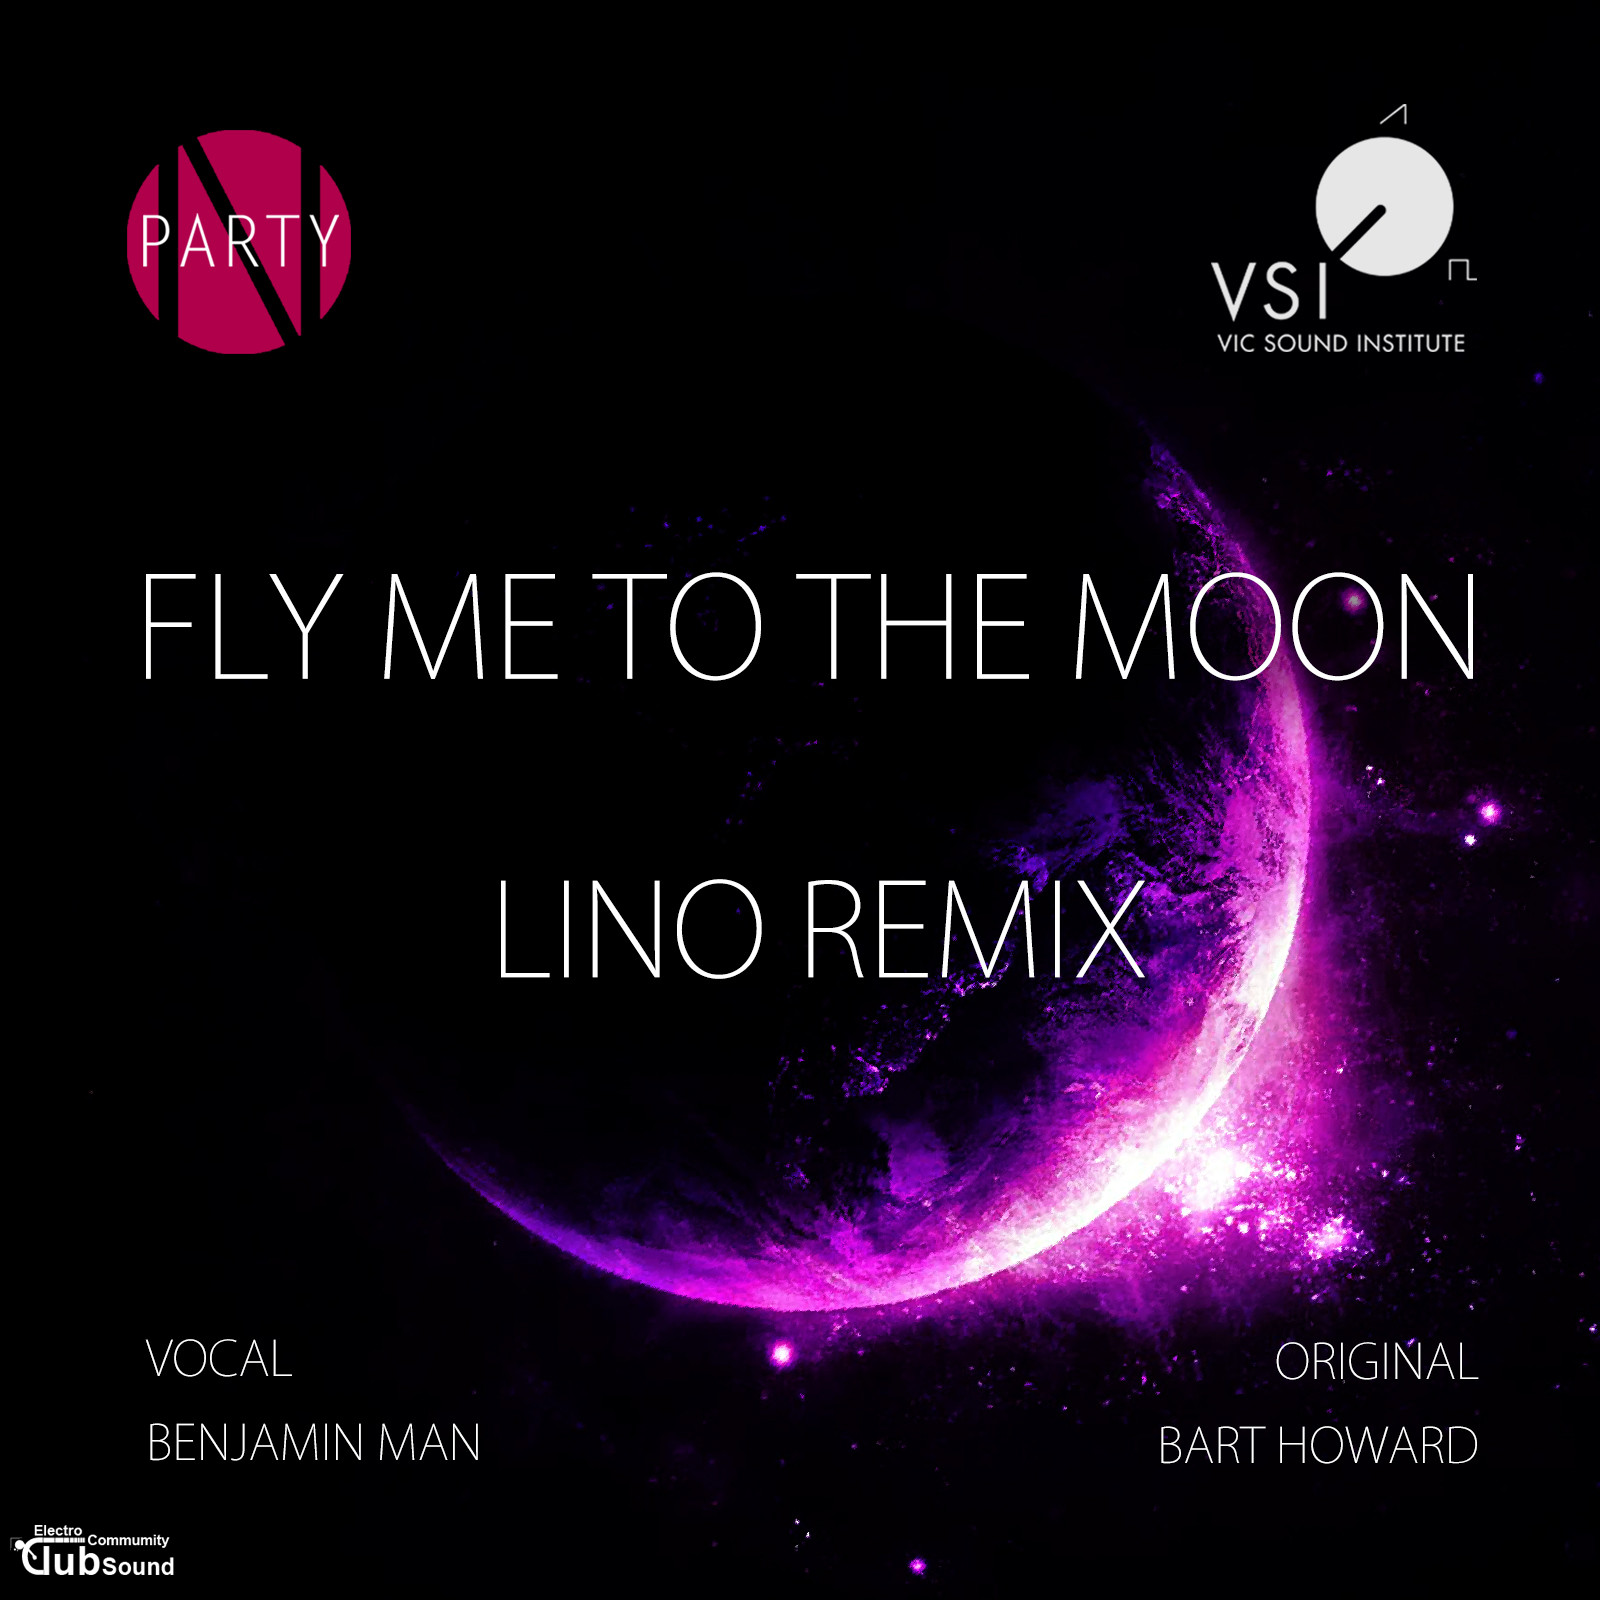 FLYME copy.jpg : [Free Download] Fly Me To The Moon (Lino Remix) (Vocal Benjamin Man)